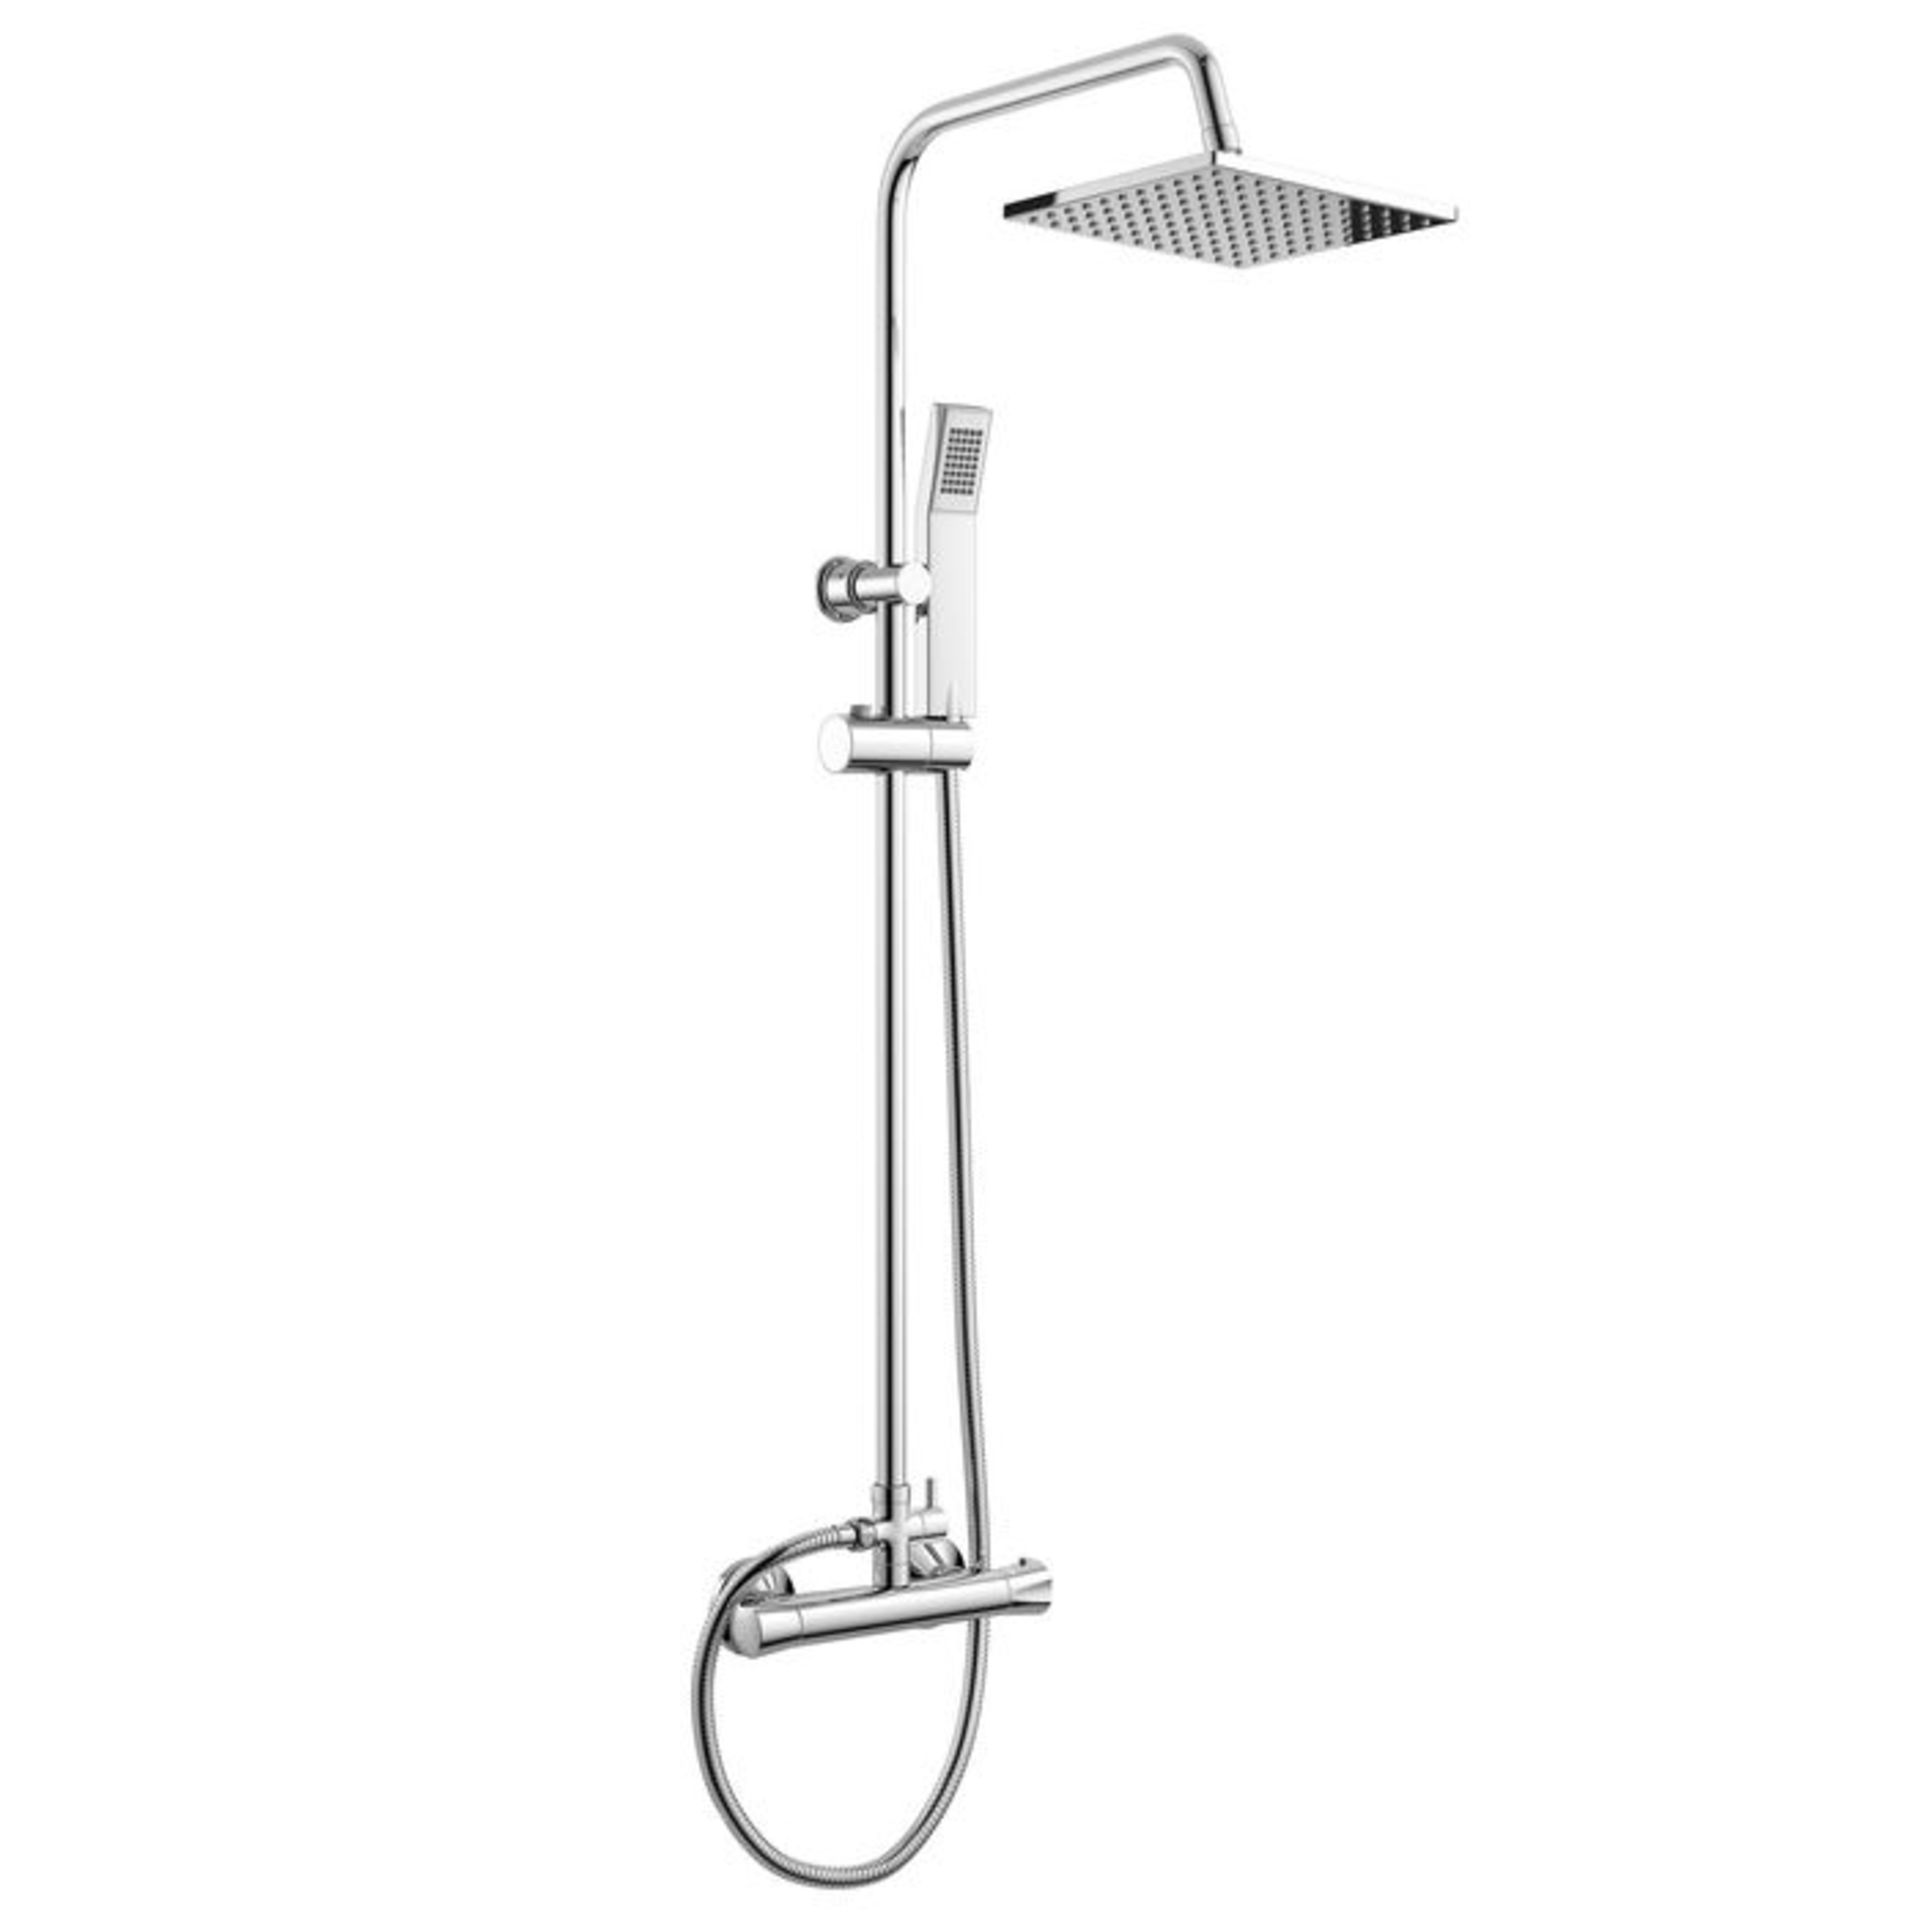 (MC43) Square Exposed Thermostatic Shower Kit & Head. Curved features and contemporary rounded